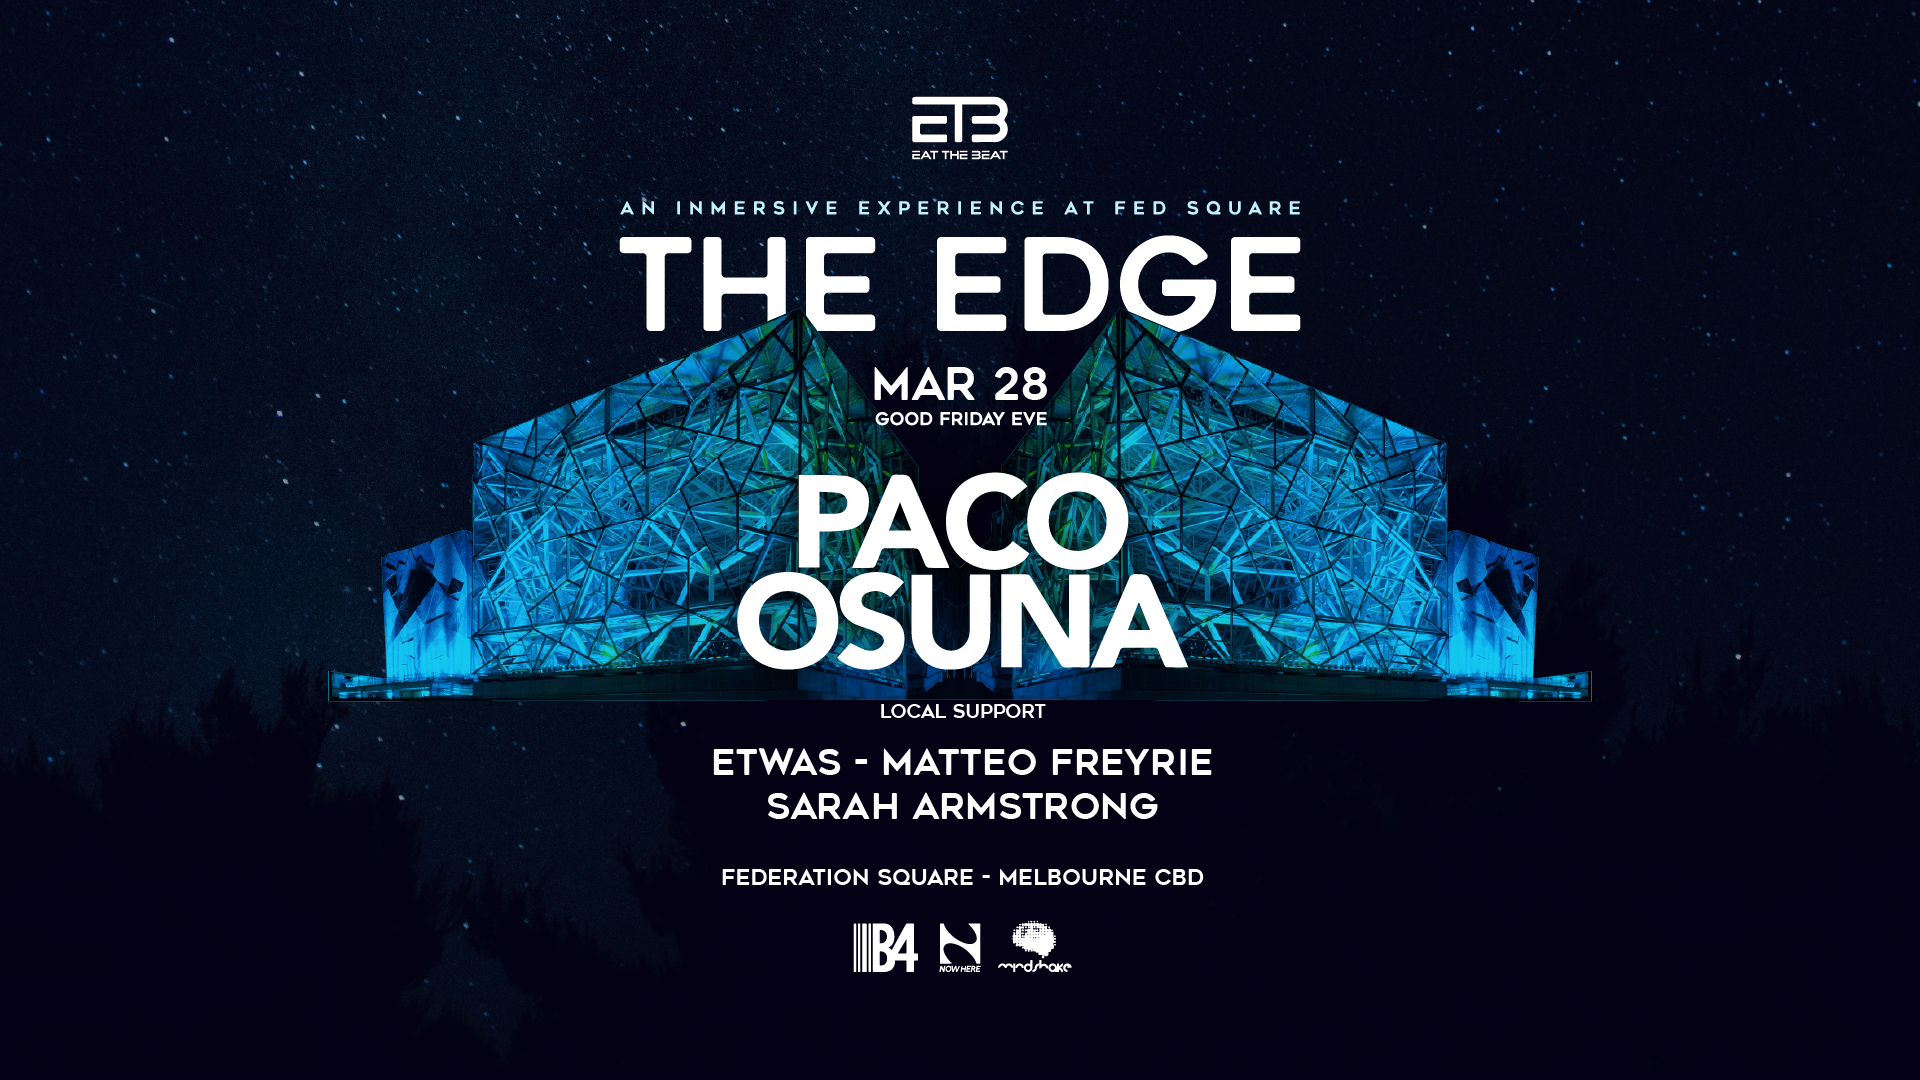 Eat The Beat at The Edge-Fed Square feat. PACO OSUNA - フライヤー表